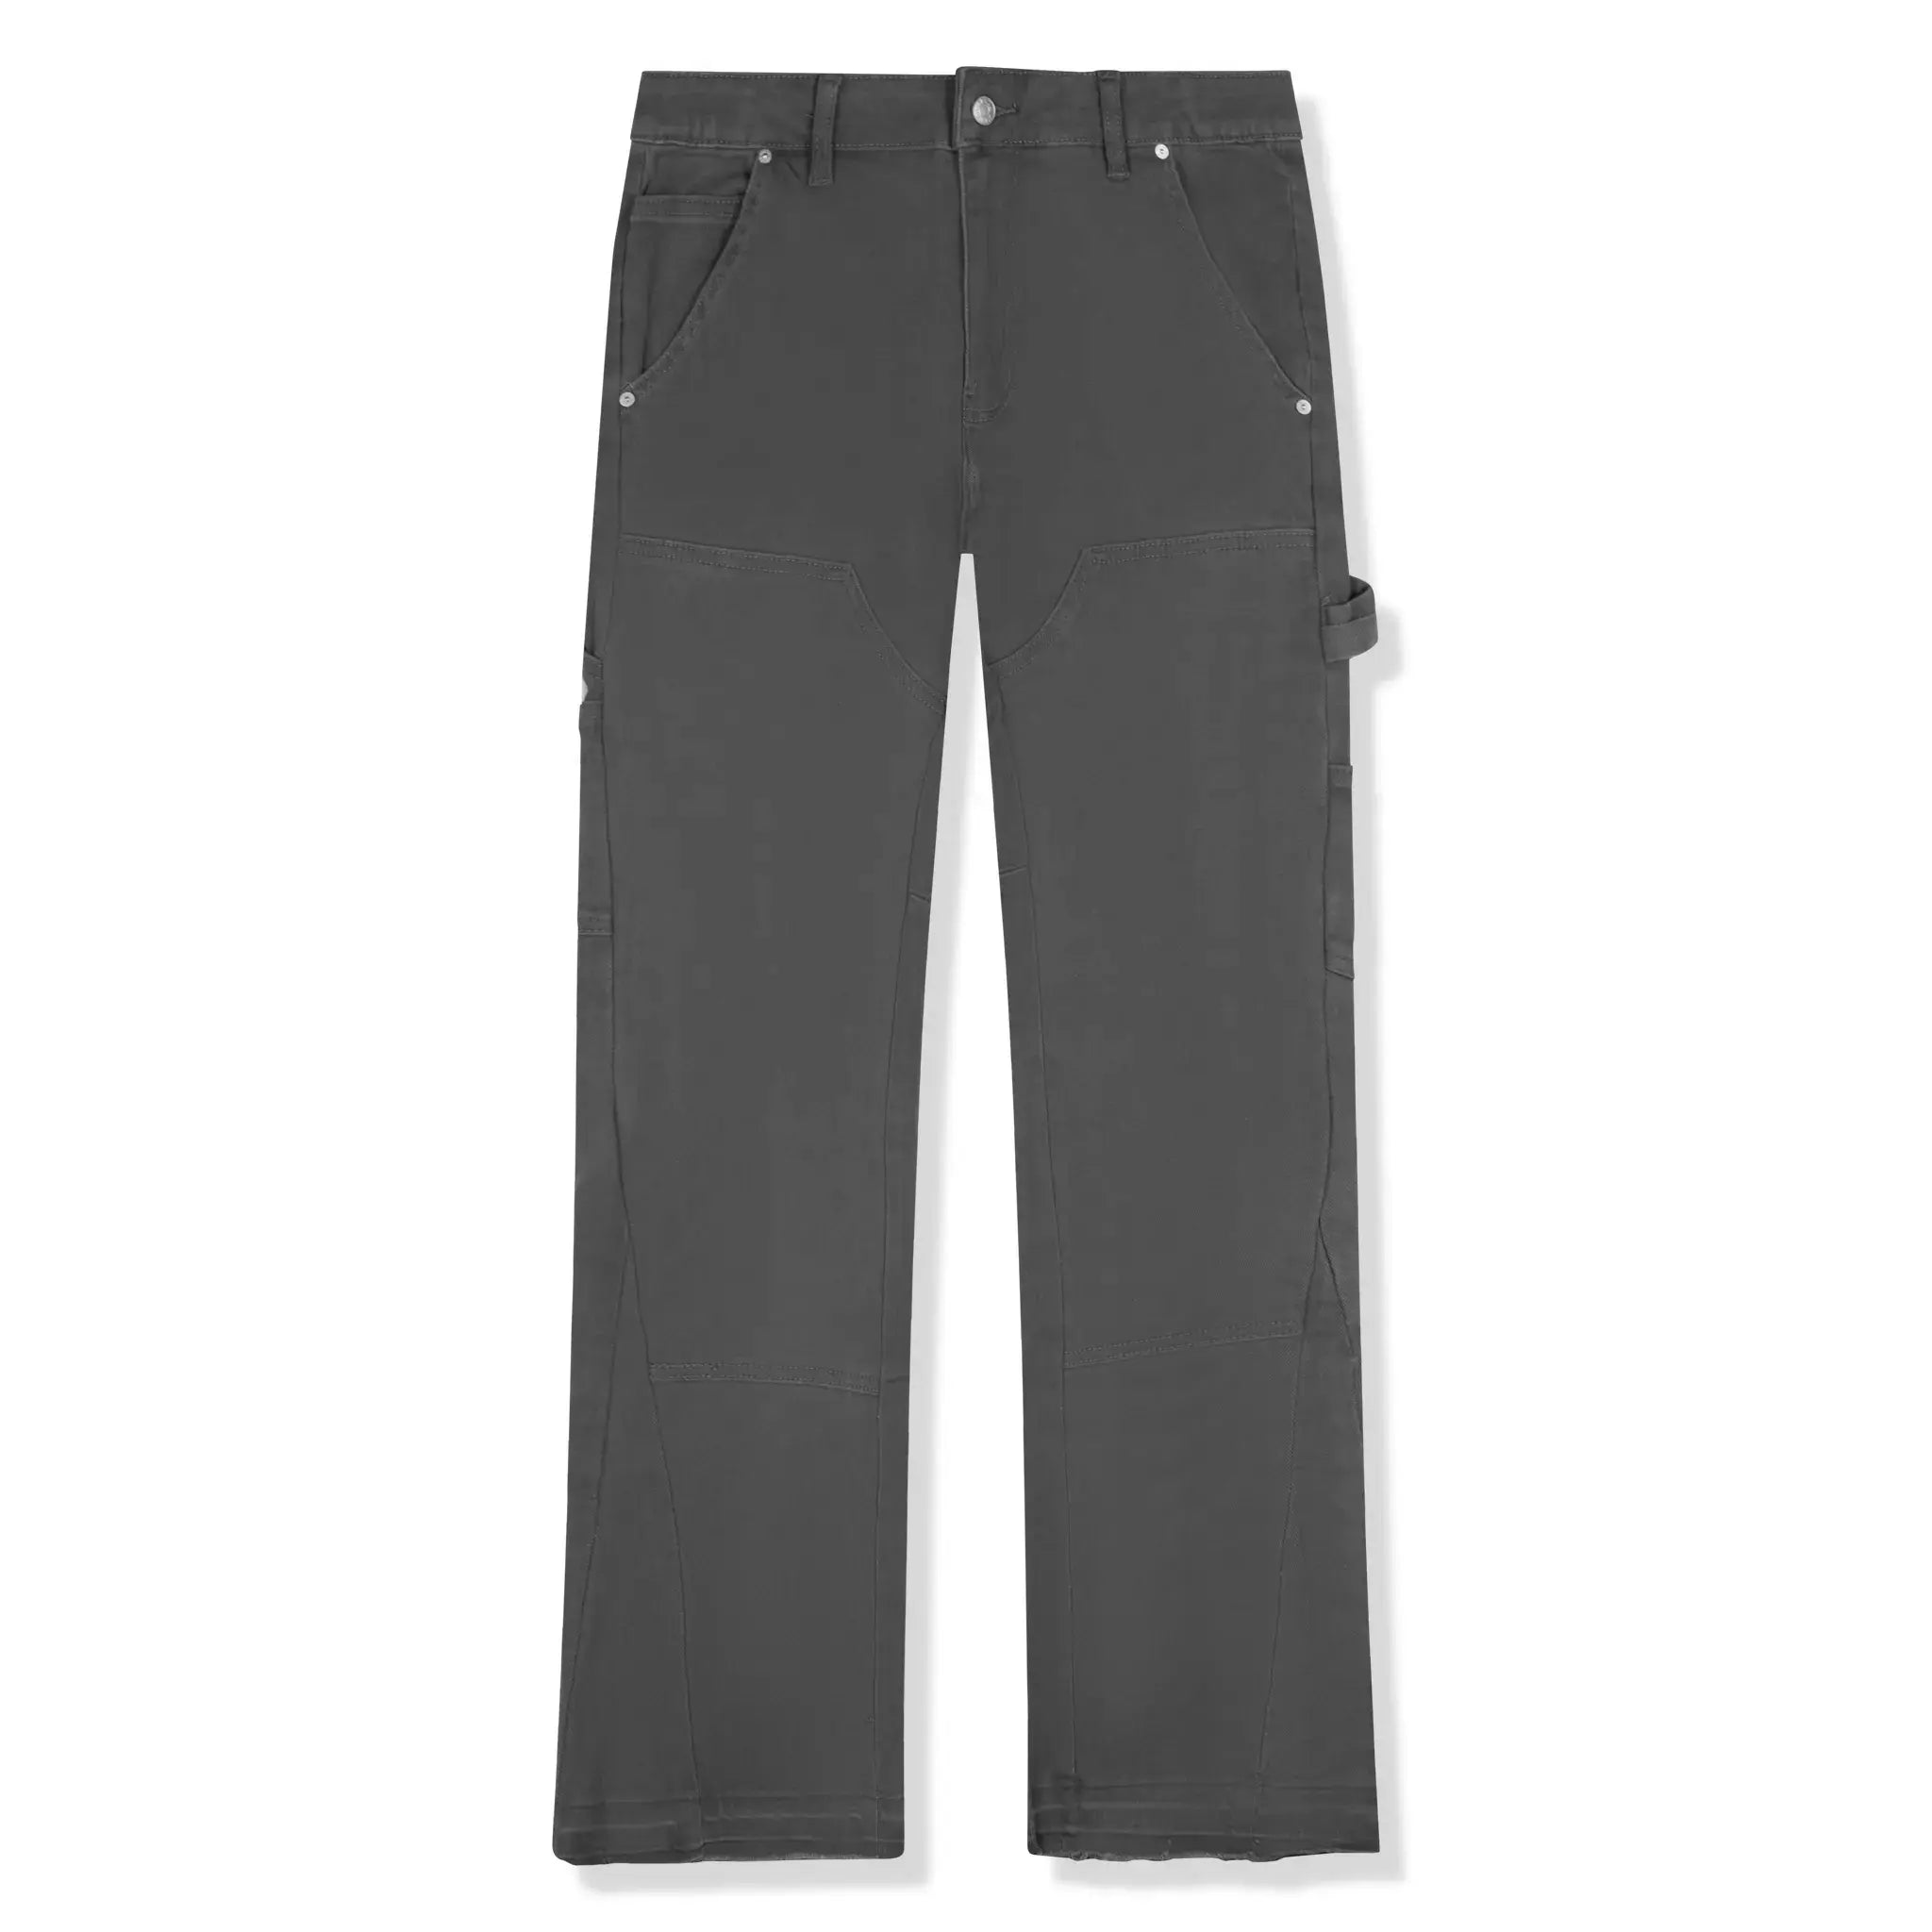 Front view of SIARR Rio Jeans Grey